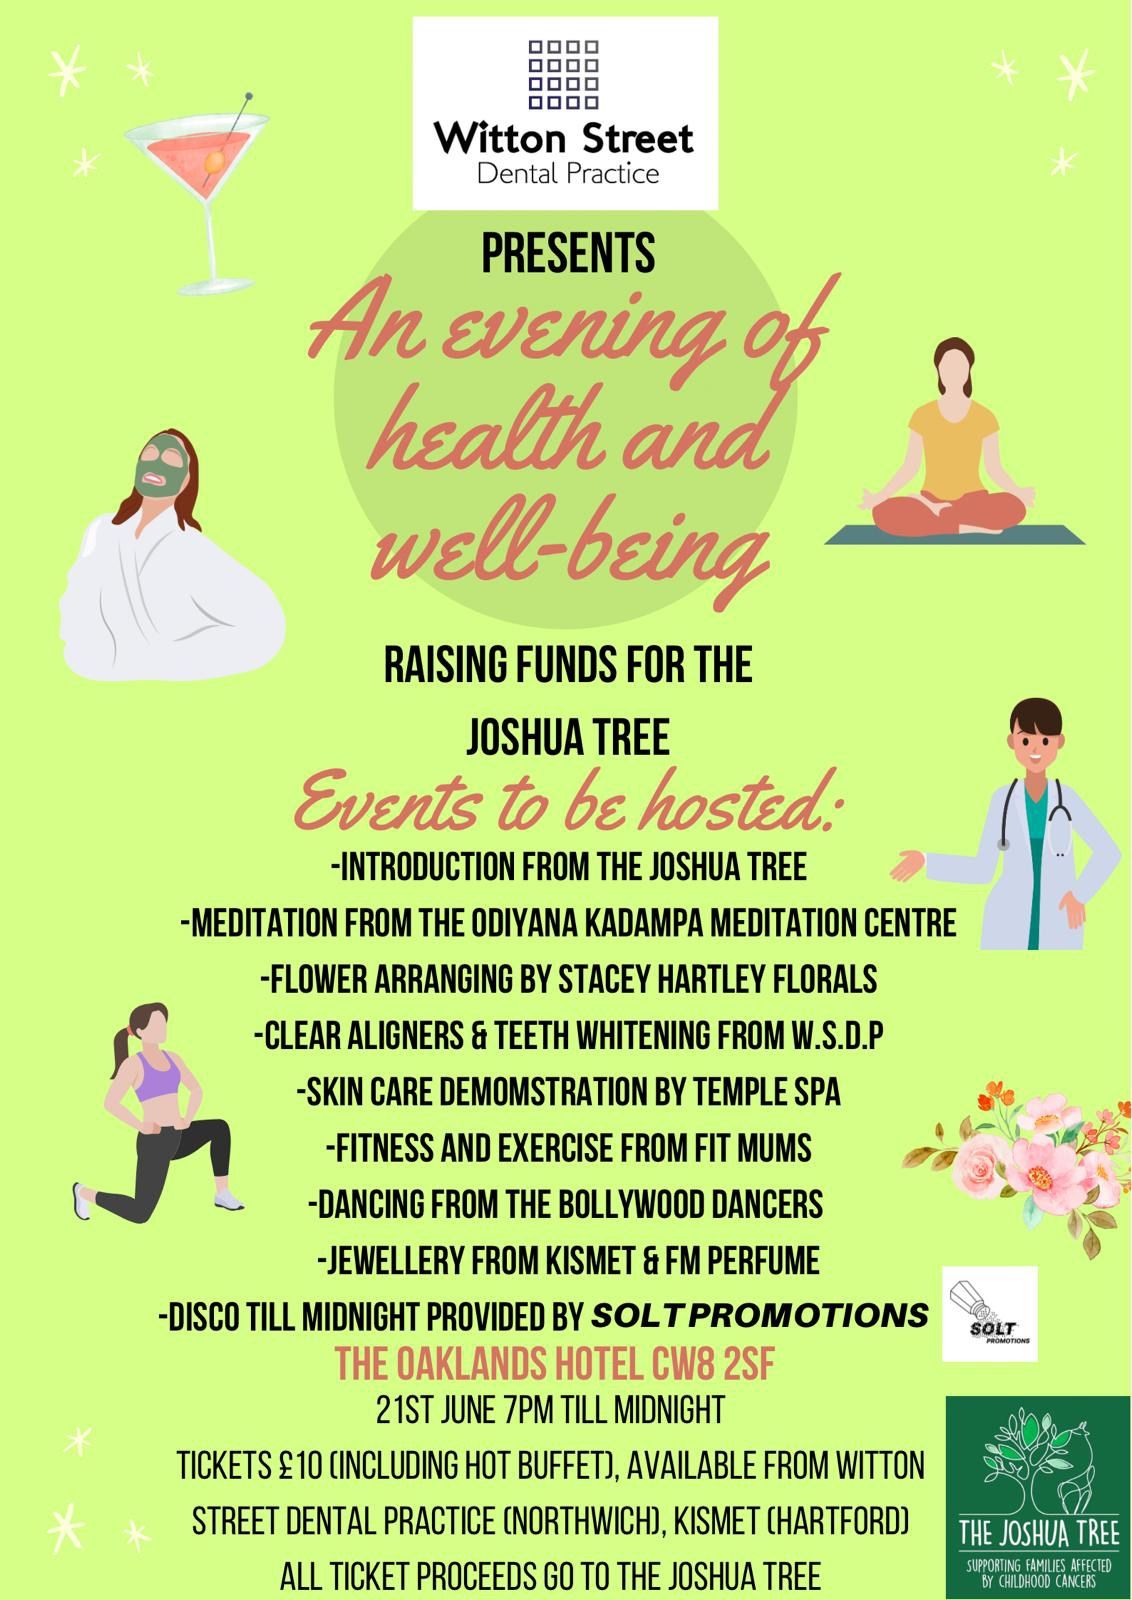 An Evening of Health and Well-being - Raising funds for The Joshua Tree